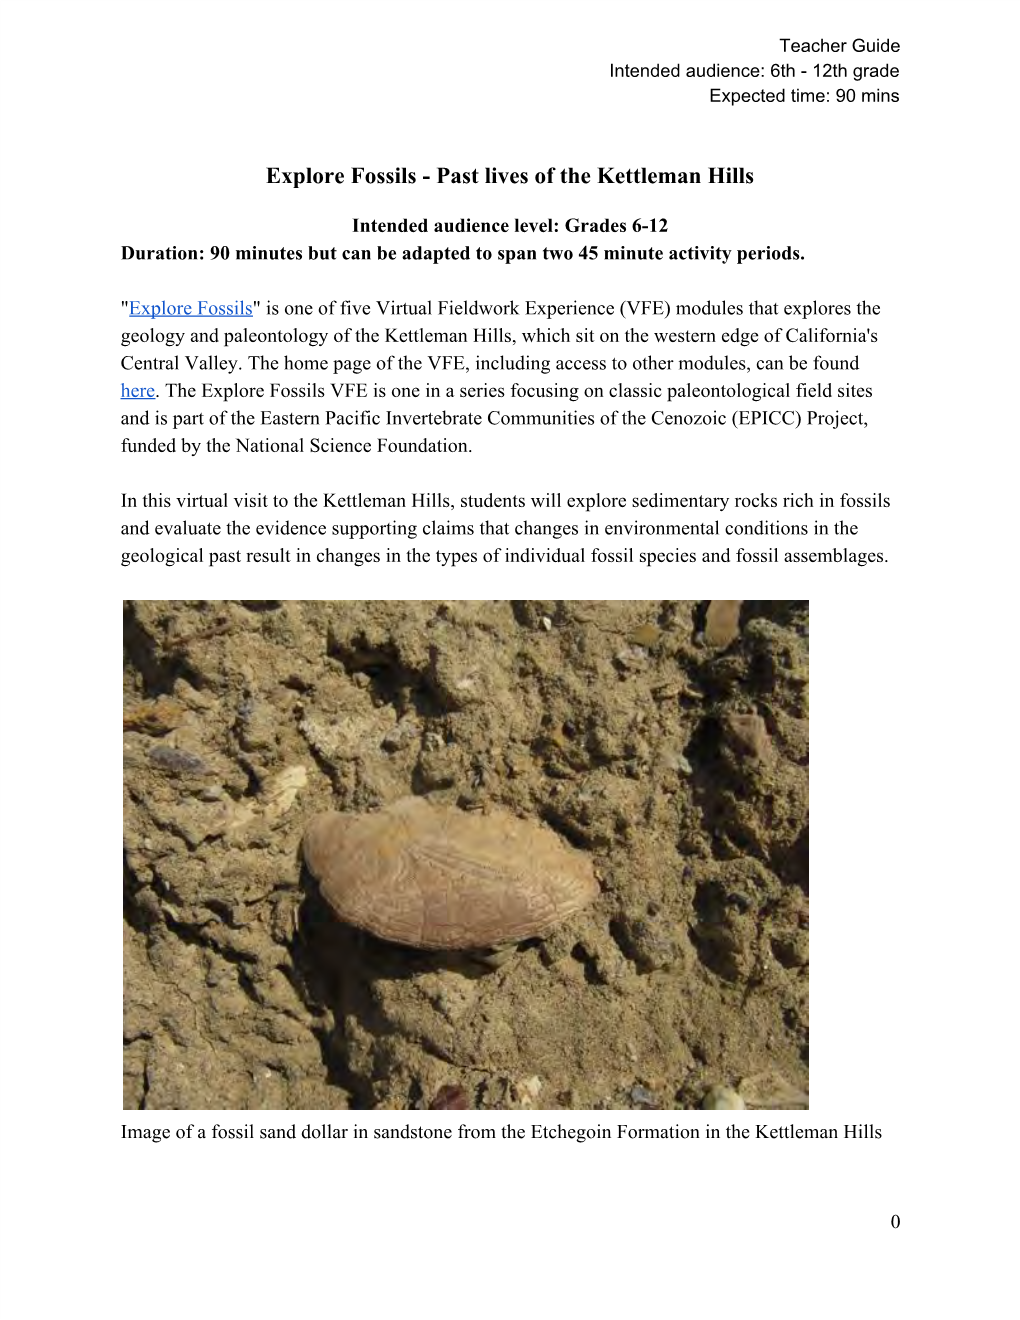 Explore Fossils - Past Lives of the Kettleman Hills